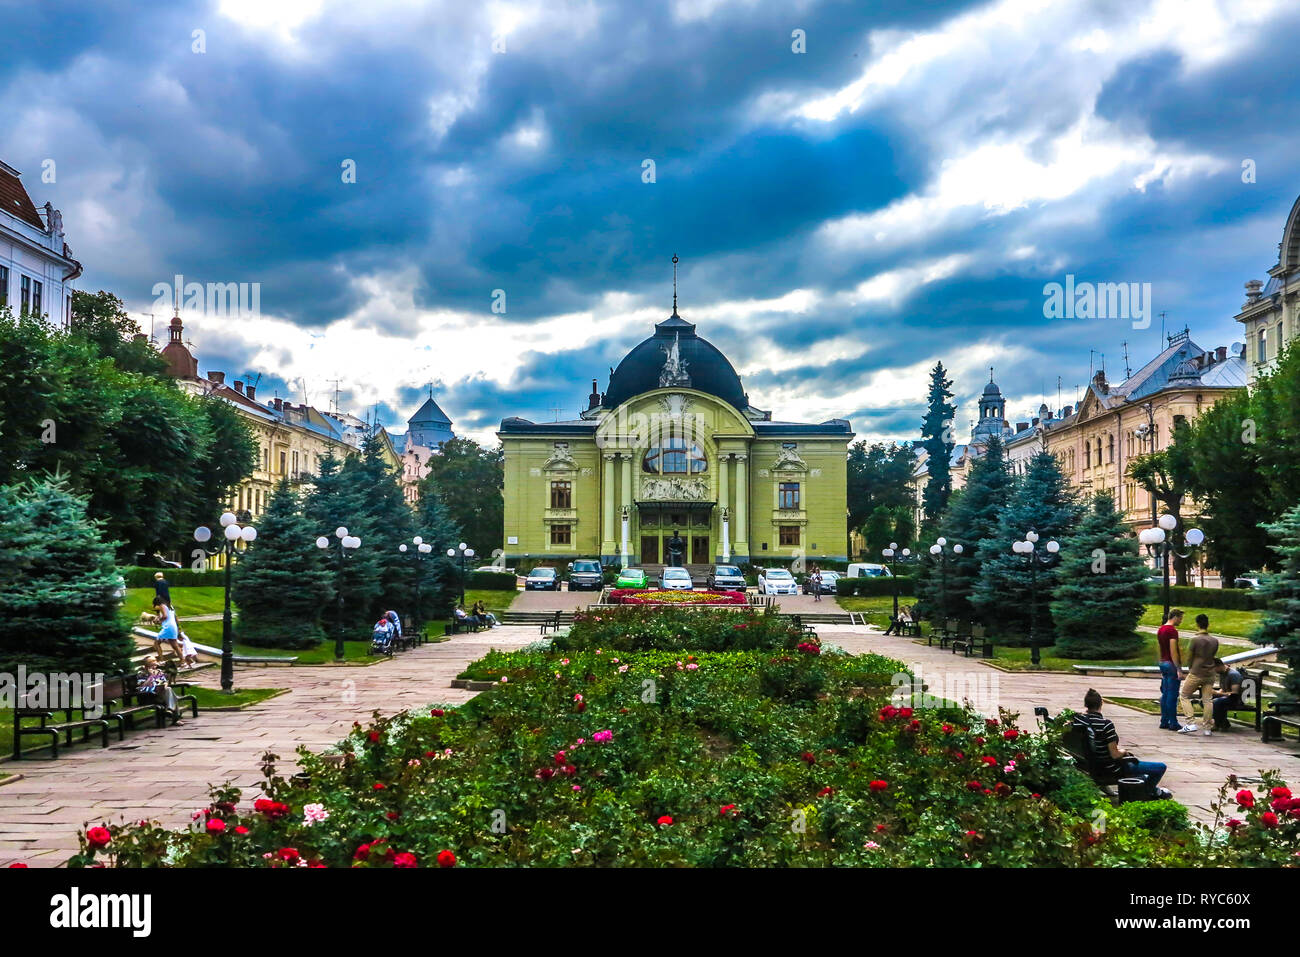 Chernivtsi Teatralna Square Music Drama Theater Frontal View with Cloudy Sky Background Stock Photo